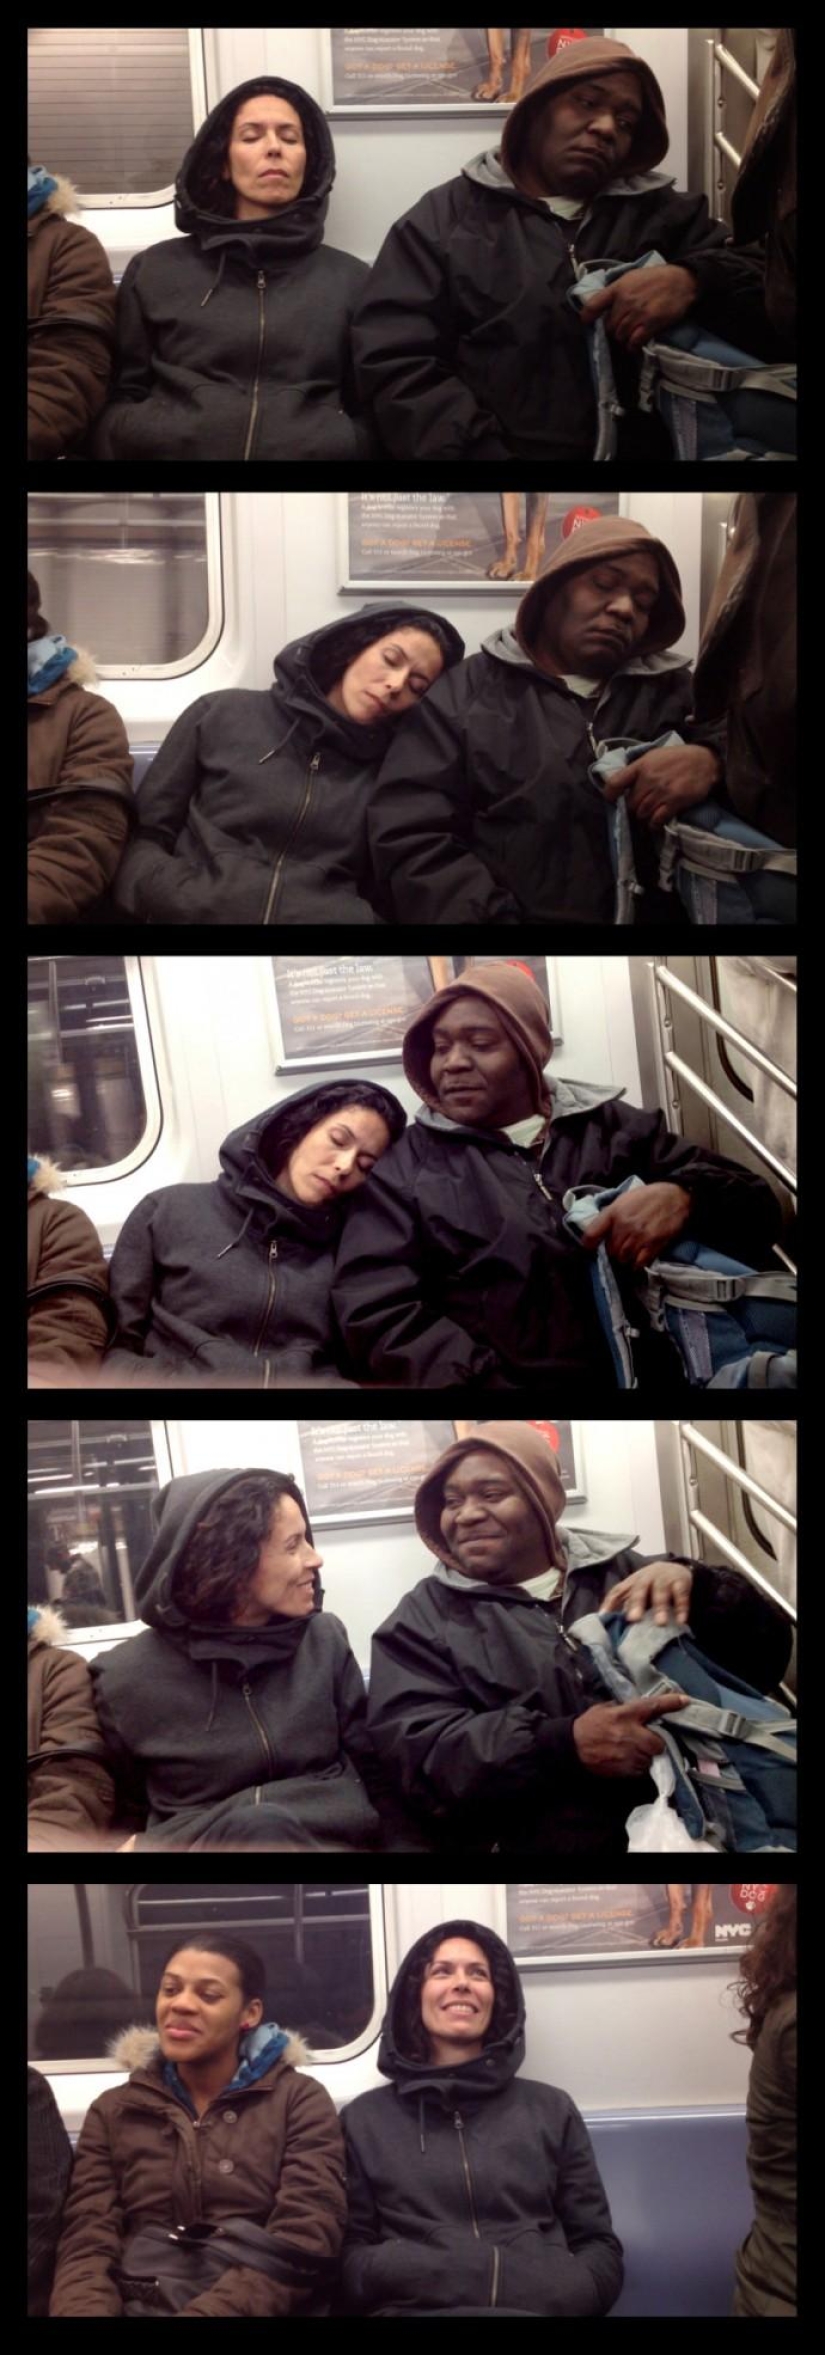 Curious photos of "sleeping" passengers in the subway